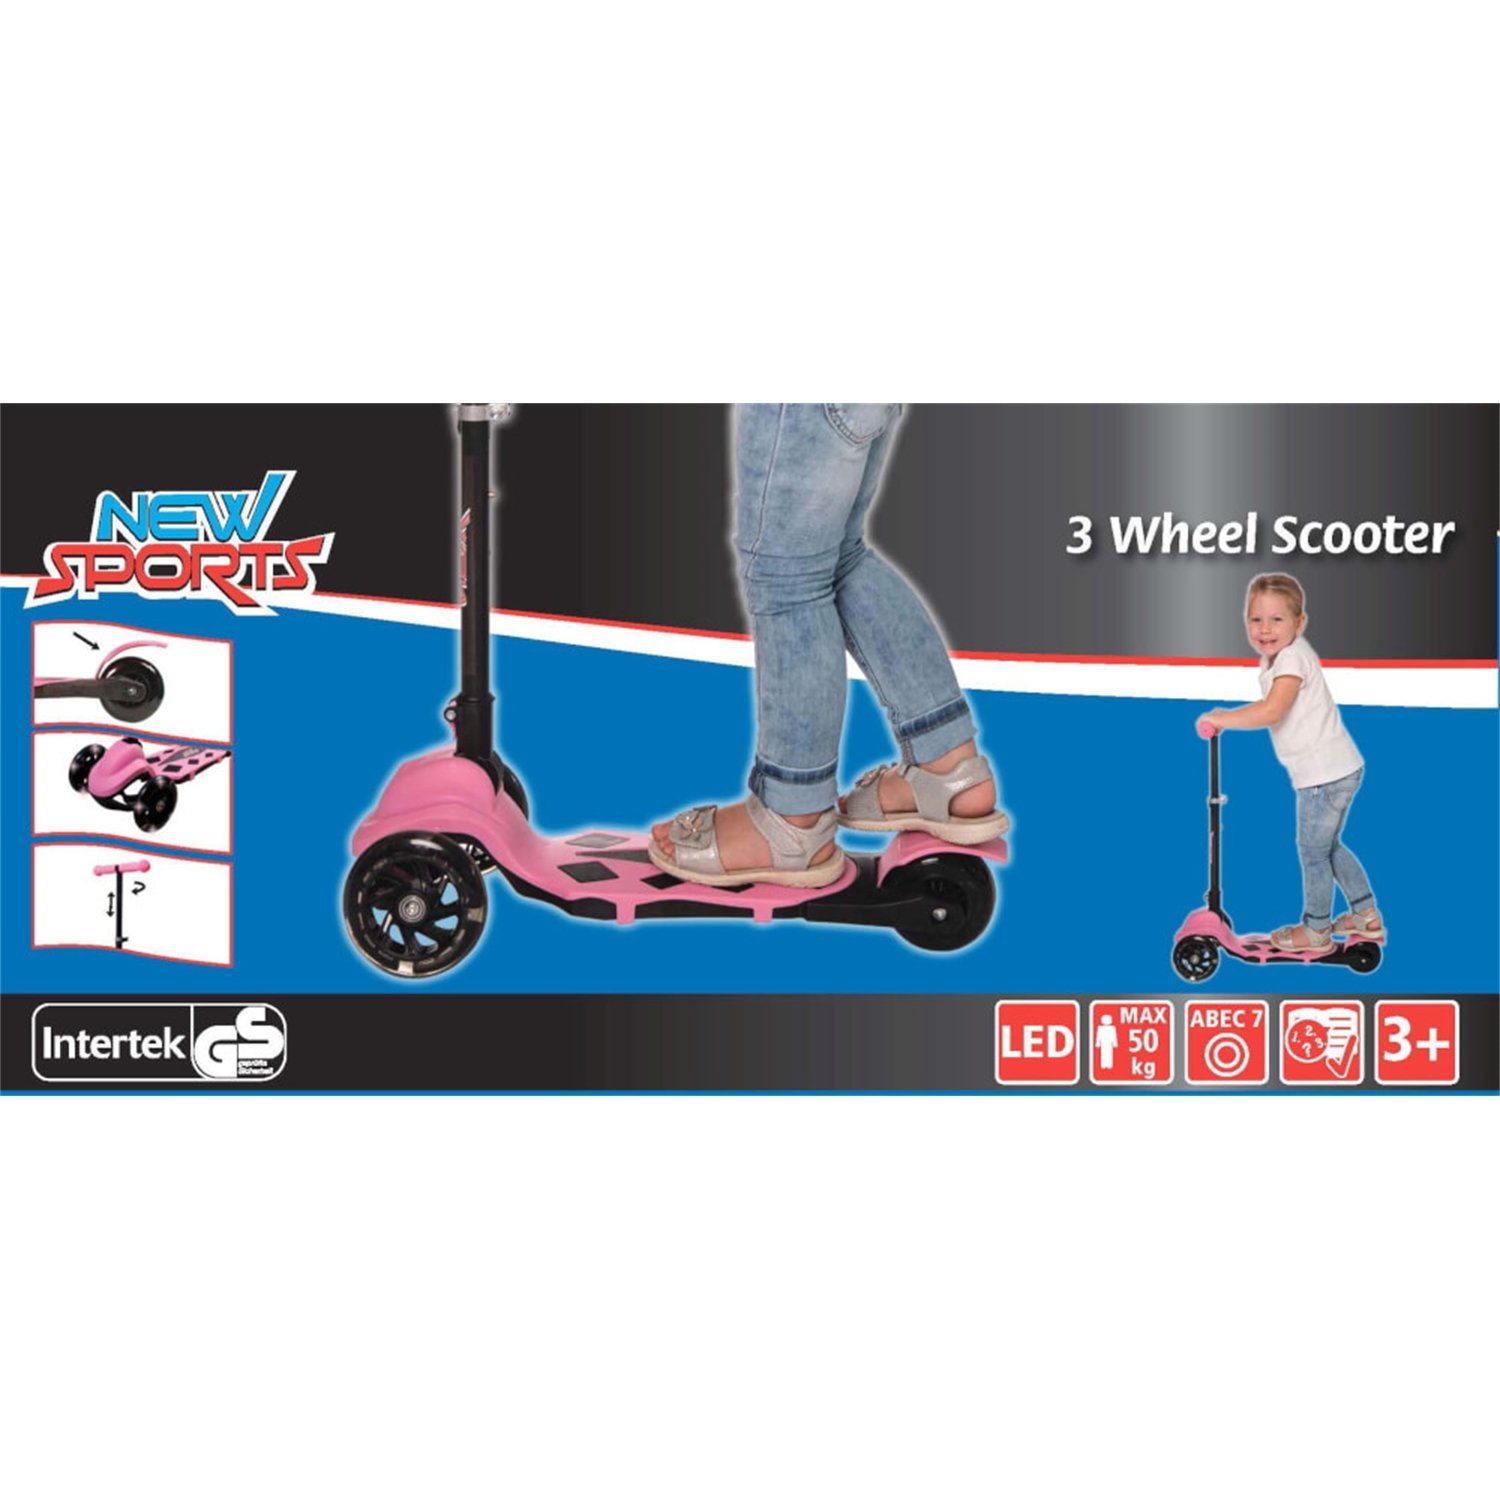 New 3-Wheel Scooter mm Vedes 110 Scooter klappbar, Sports Rosa, 73422019